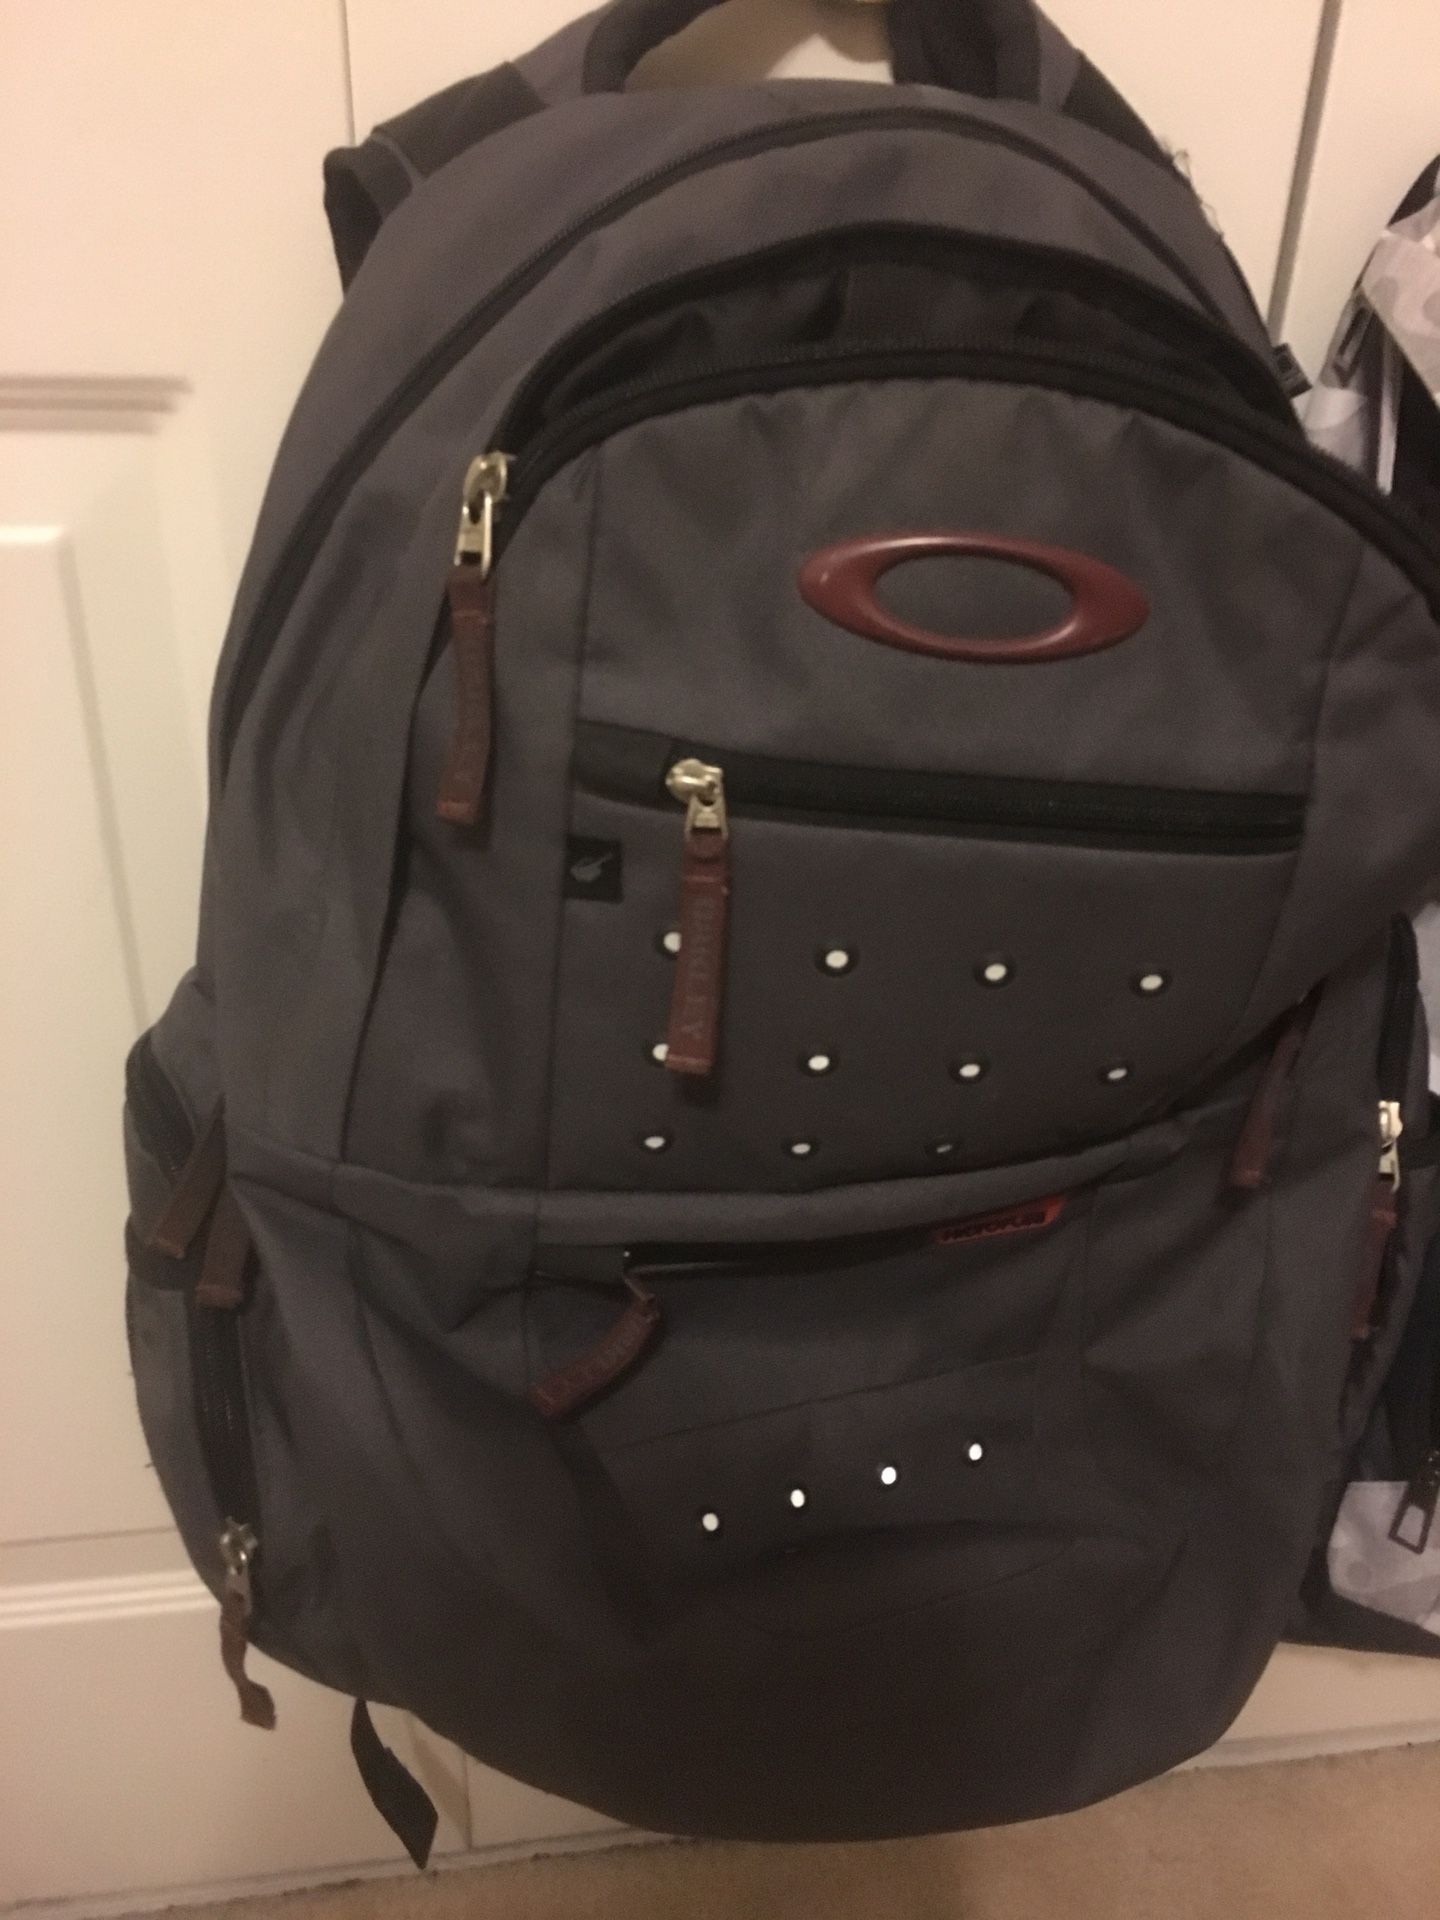 Oakley backpack barely used